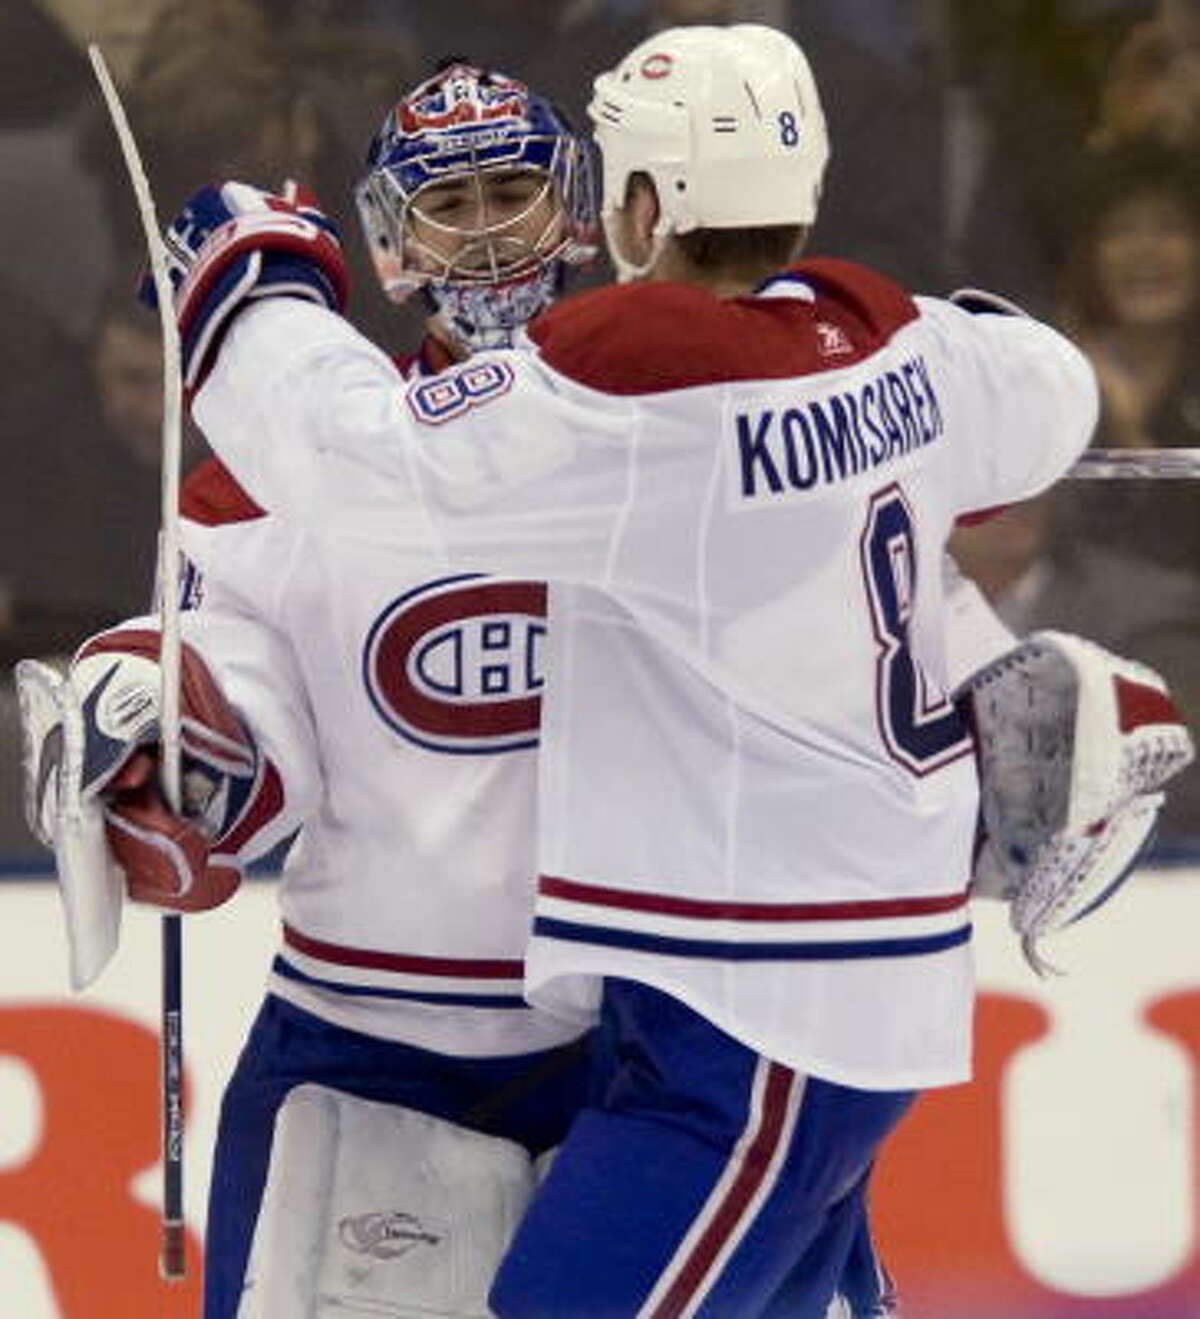 Montreal Canadiens Michael Komisarek, right, congratulates goaltender Carey Price after winning the shootout against the Toronto Maple Leafs.